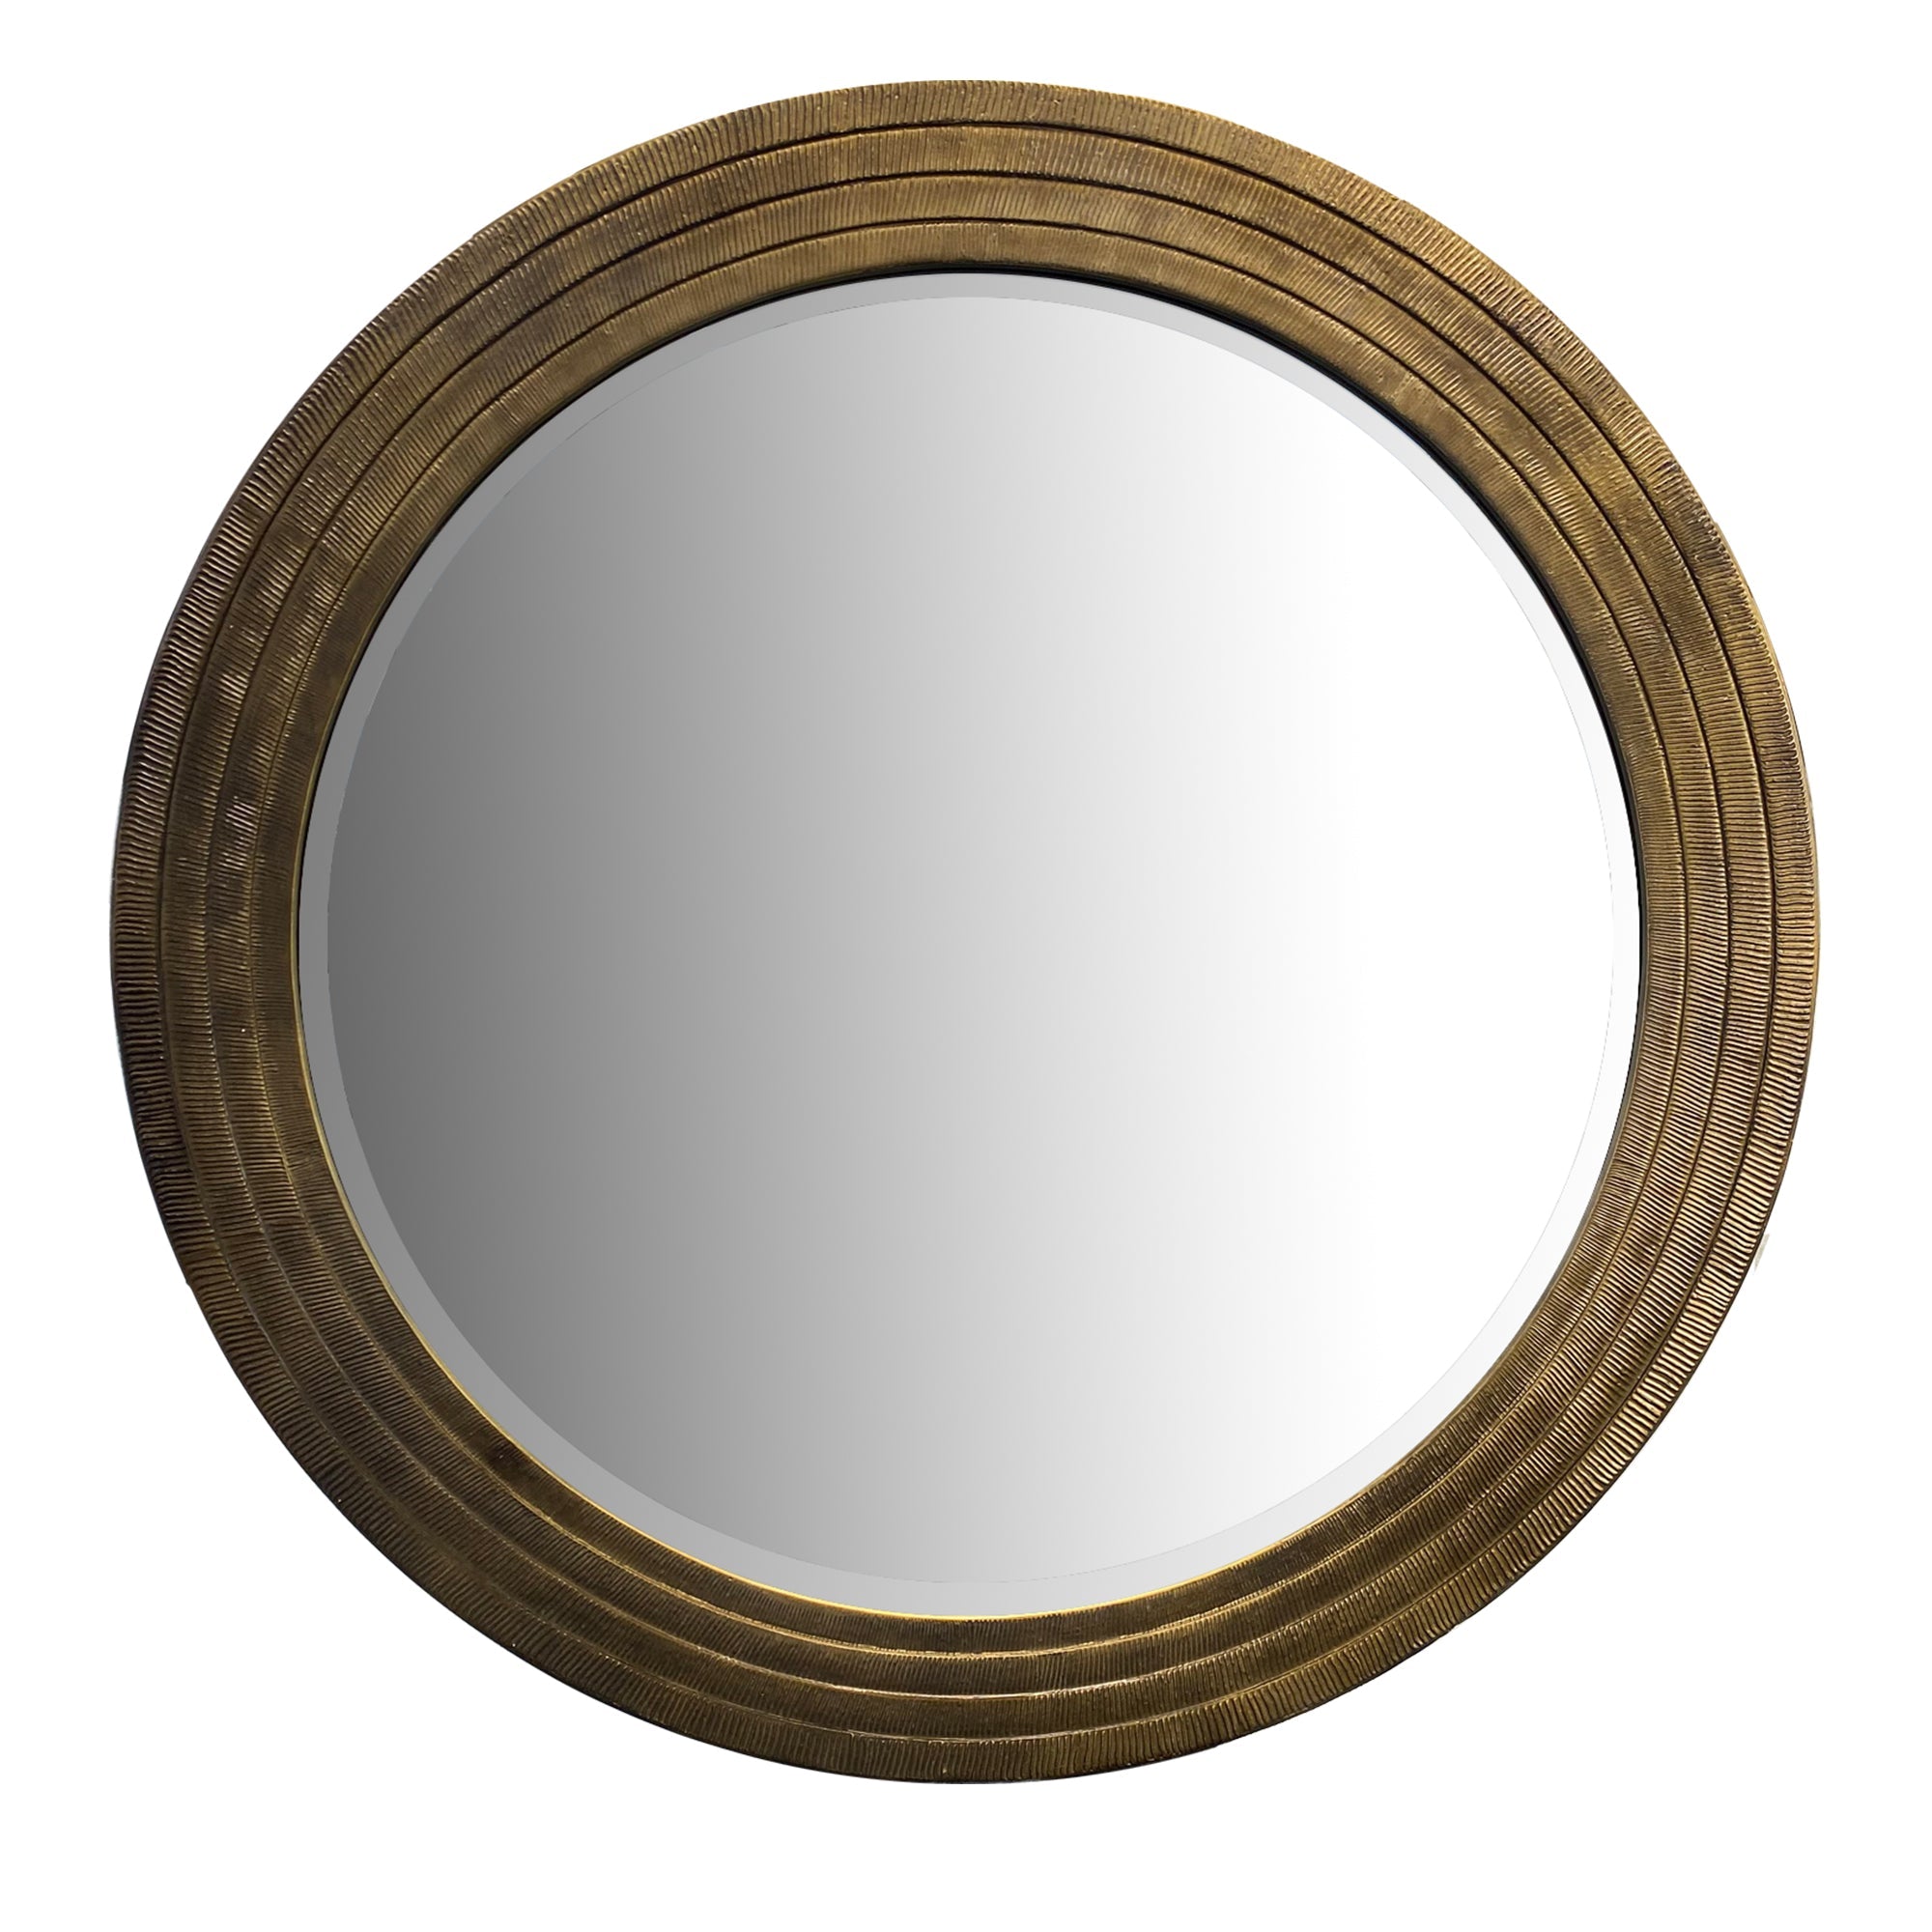 Round Layered Wooden Frame Decor Wall Mirror with Hand Carved Texture, Brown - Mirrors